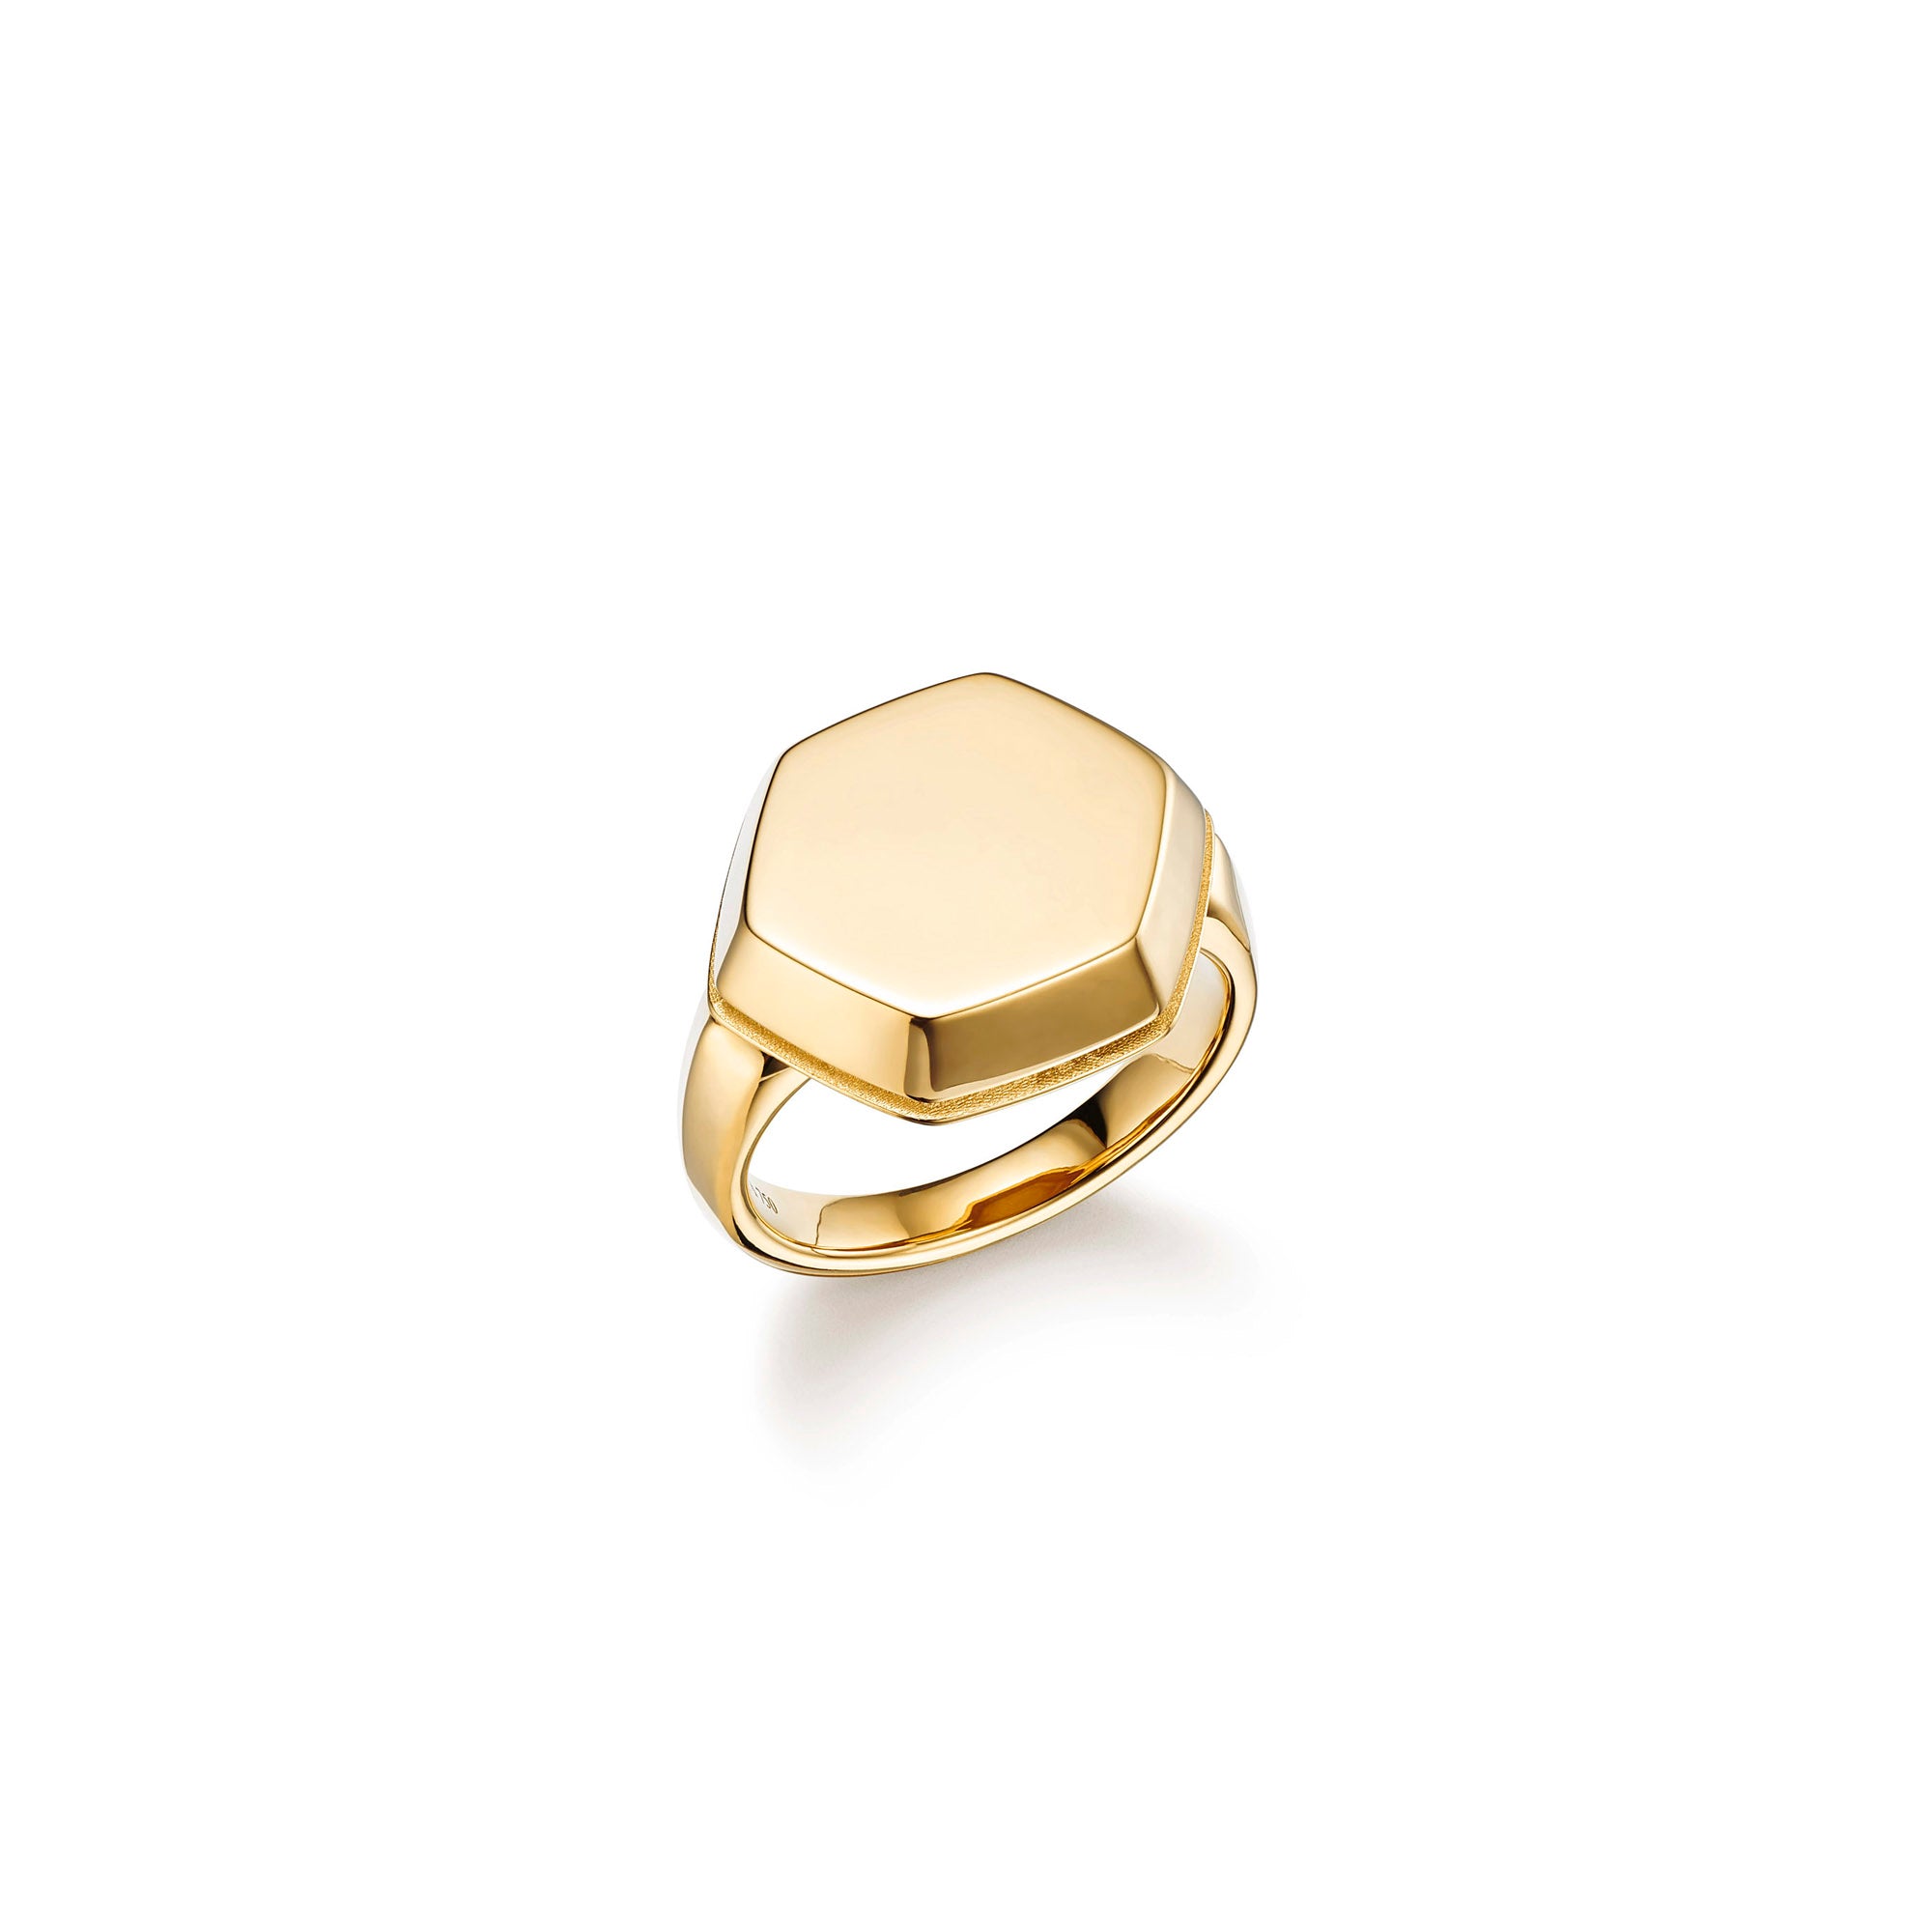 Sustainable Gold Ring Featuring a Flat Hexagonal Design at the Top of the Ring